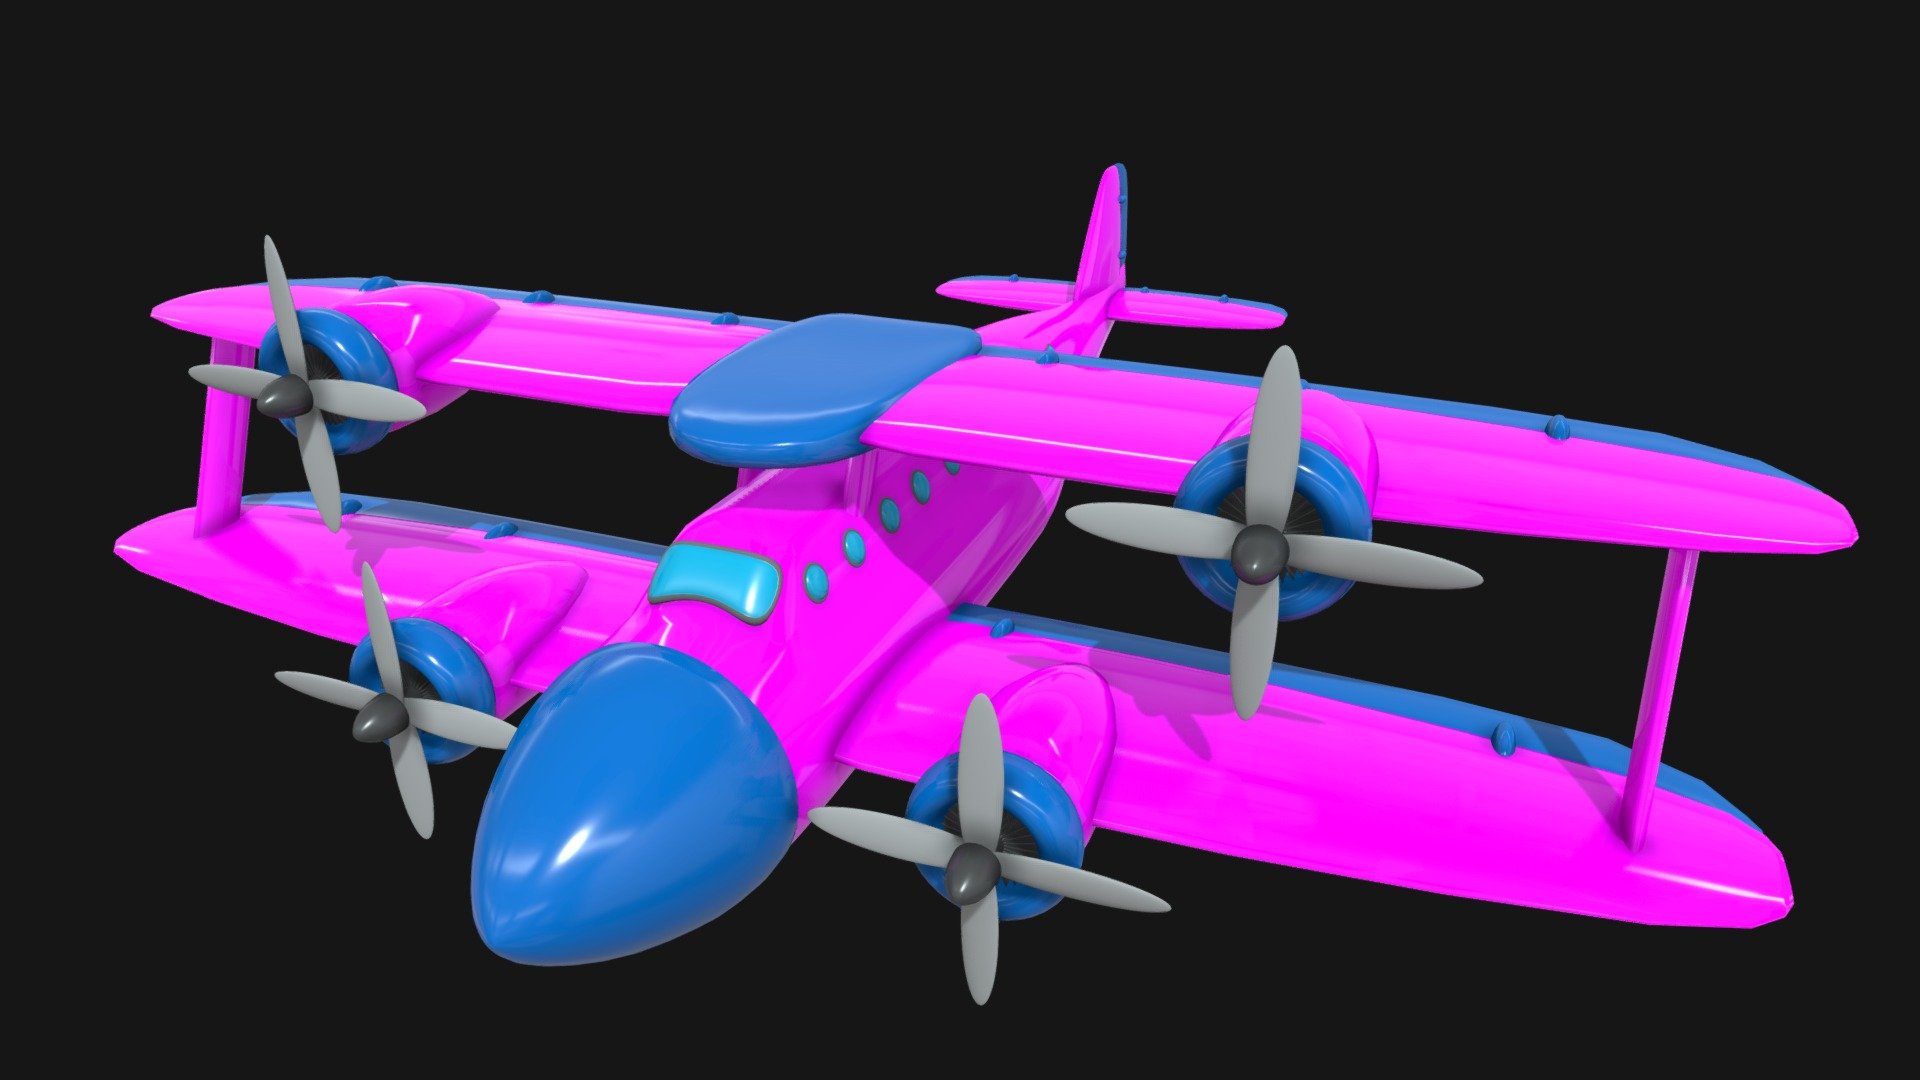 simple cartoon air plane





passager bi-plane with 4 engines




could be a toy air plane




no textures.. just shaders for easy color changes



part of a collection https://skfb.ly/oI7VQ - Toon plane 6 - Buy Royalty Free 3D model by Randall_3D 3d model